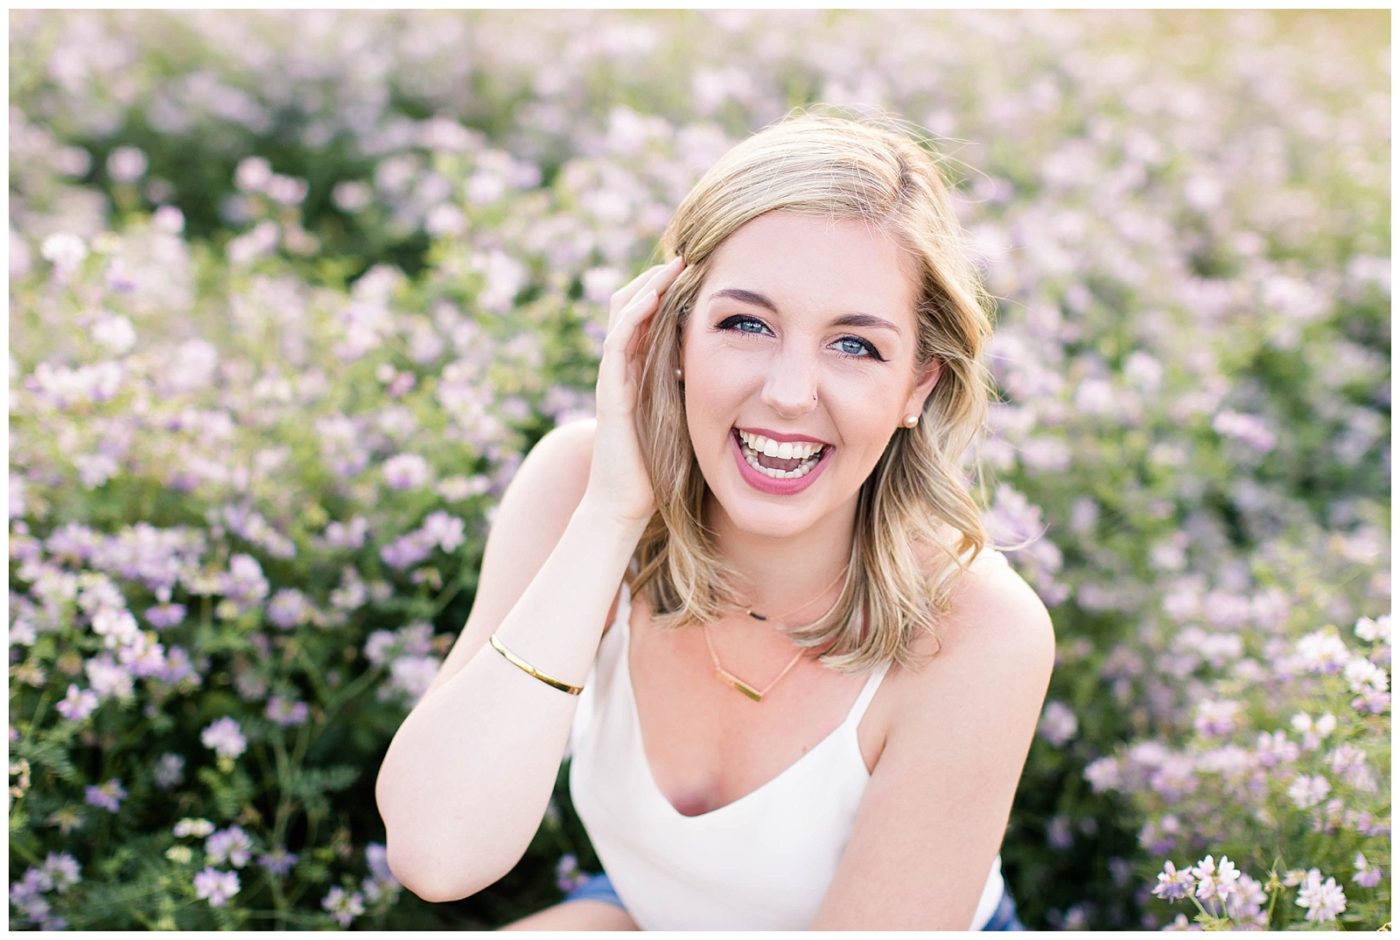 Joyful portrait of Abby Sheehan Laughing while looking at the camera in a field of wildflowers 